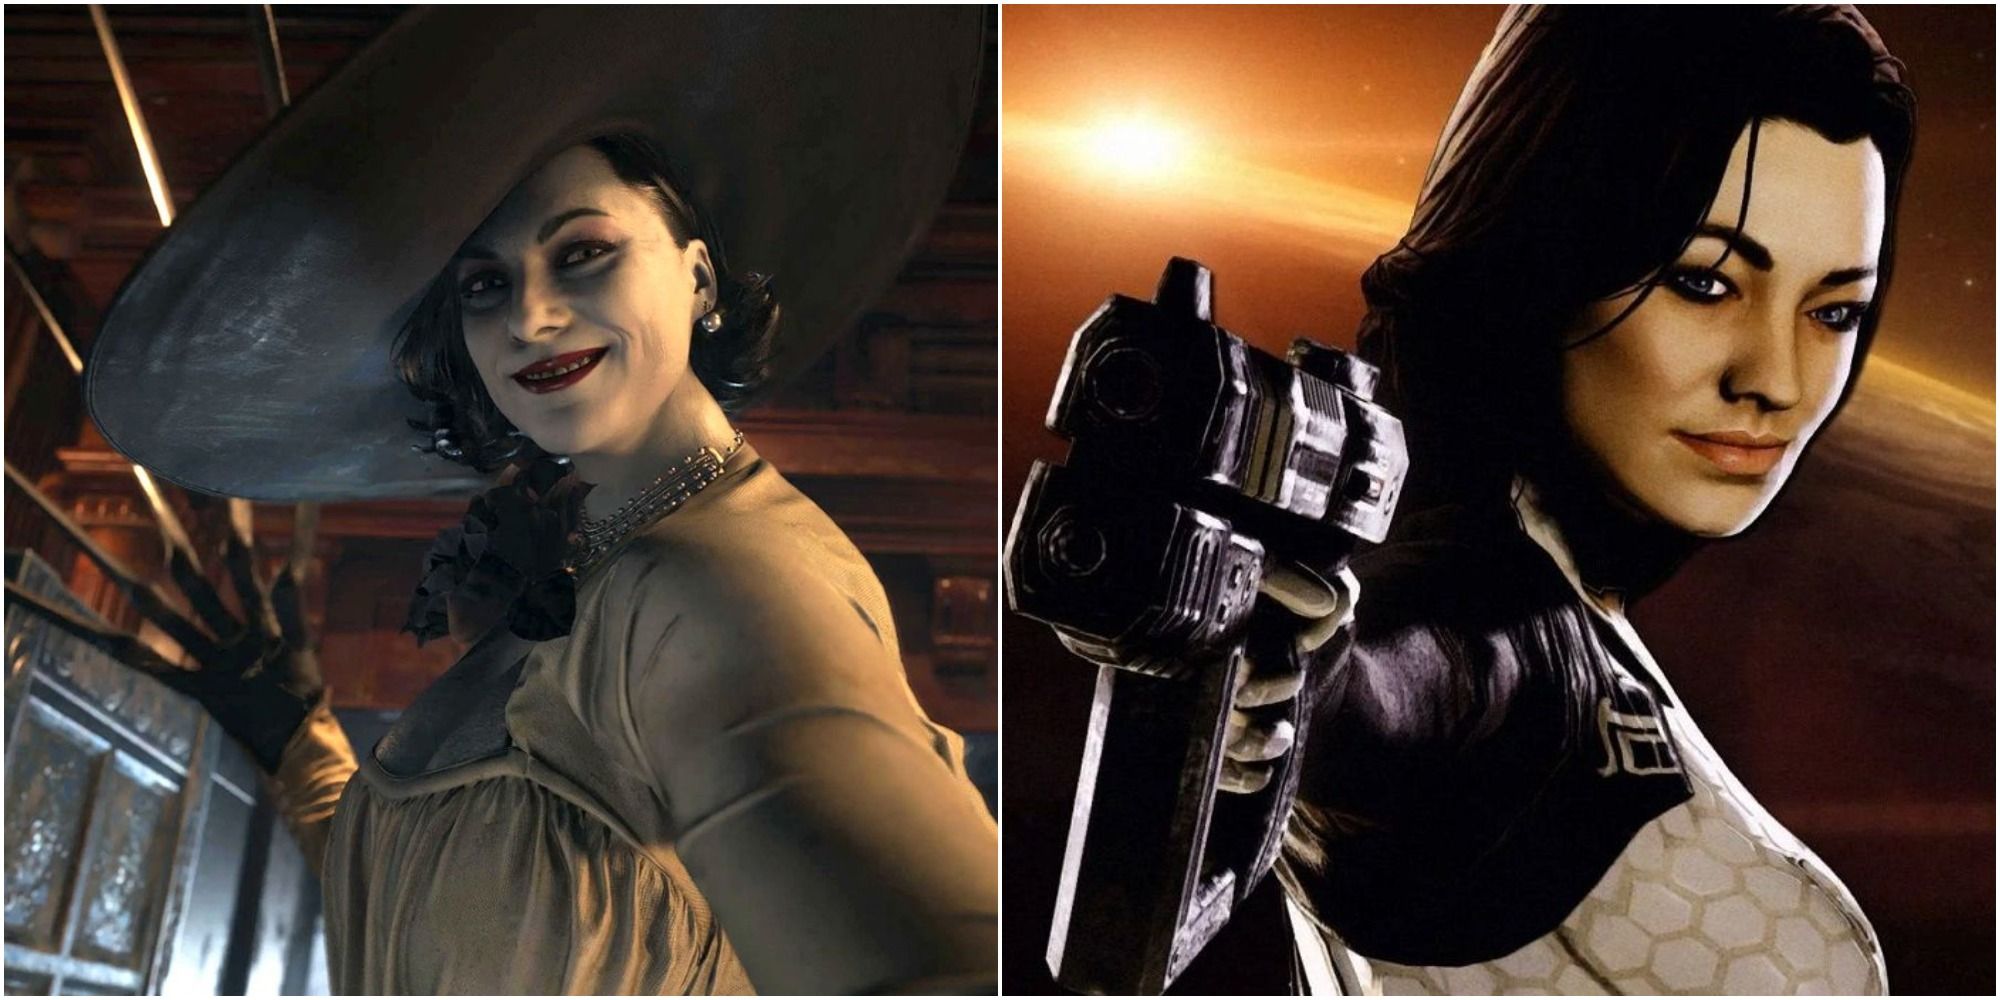 Video game characters you didn't know had real-life inspirations